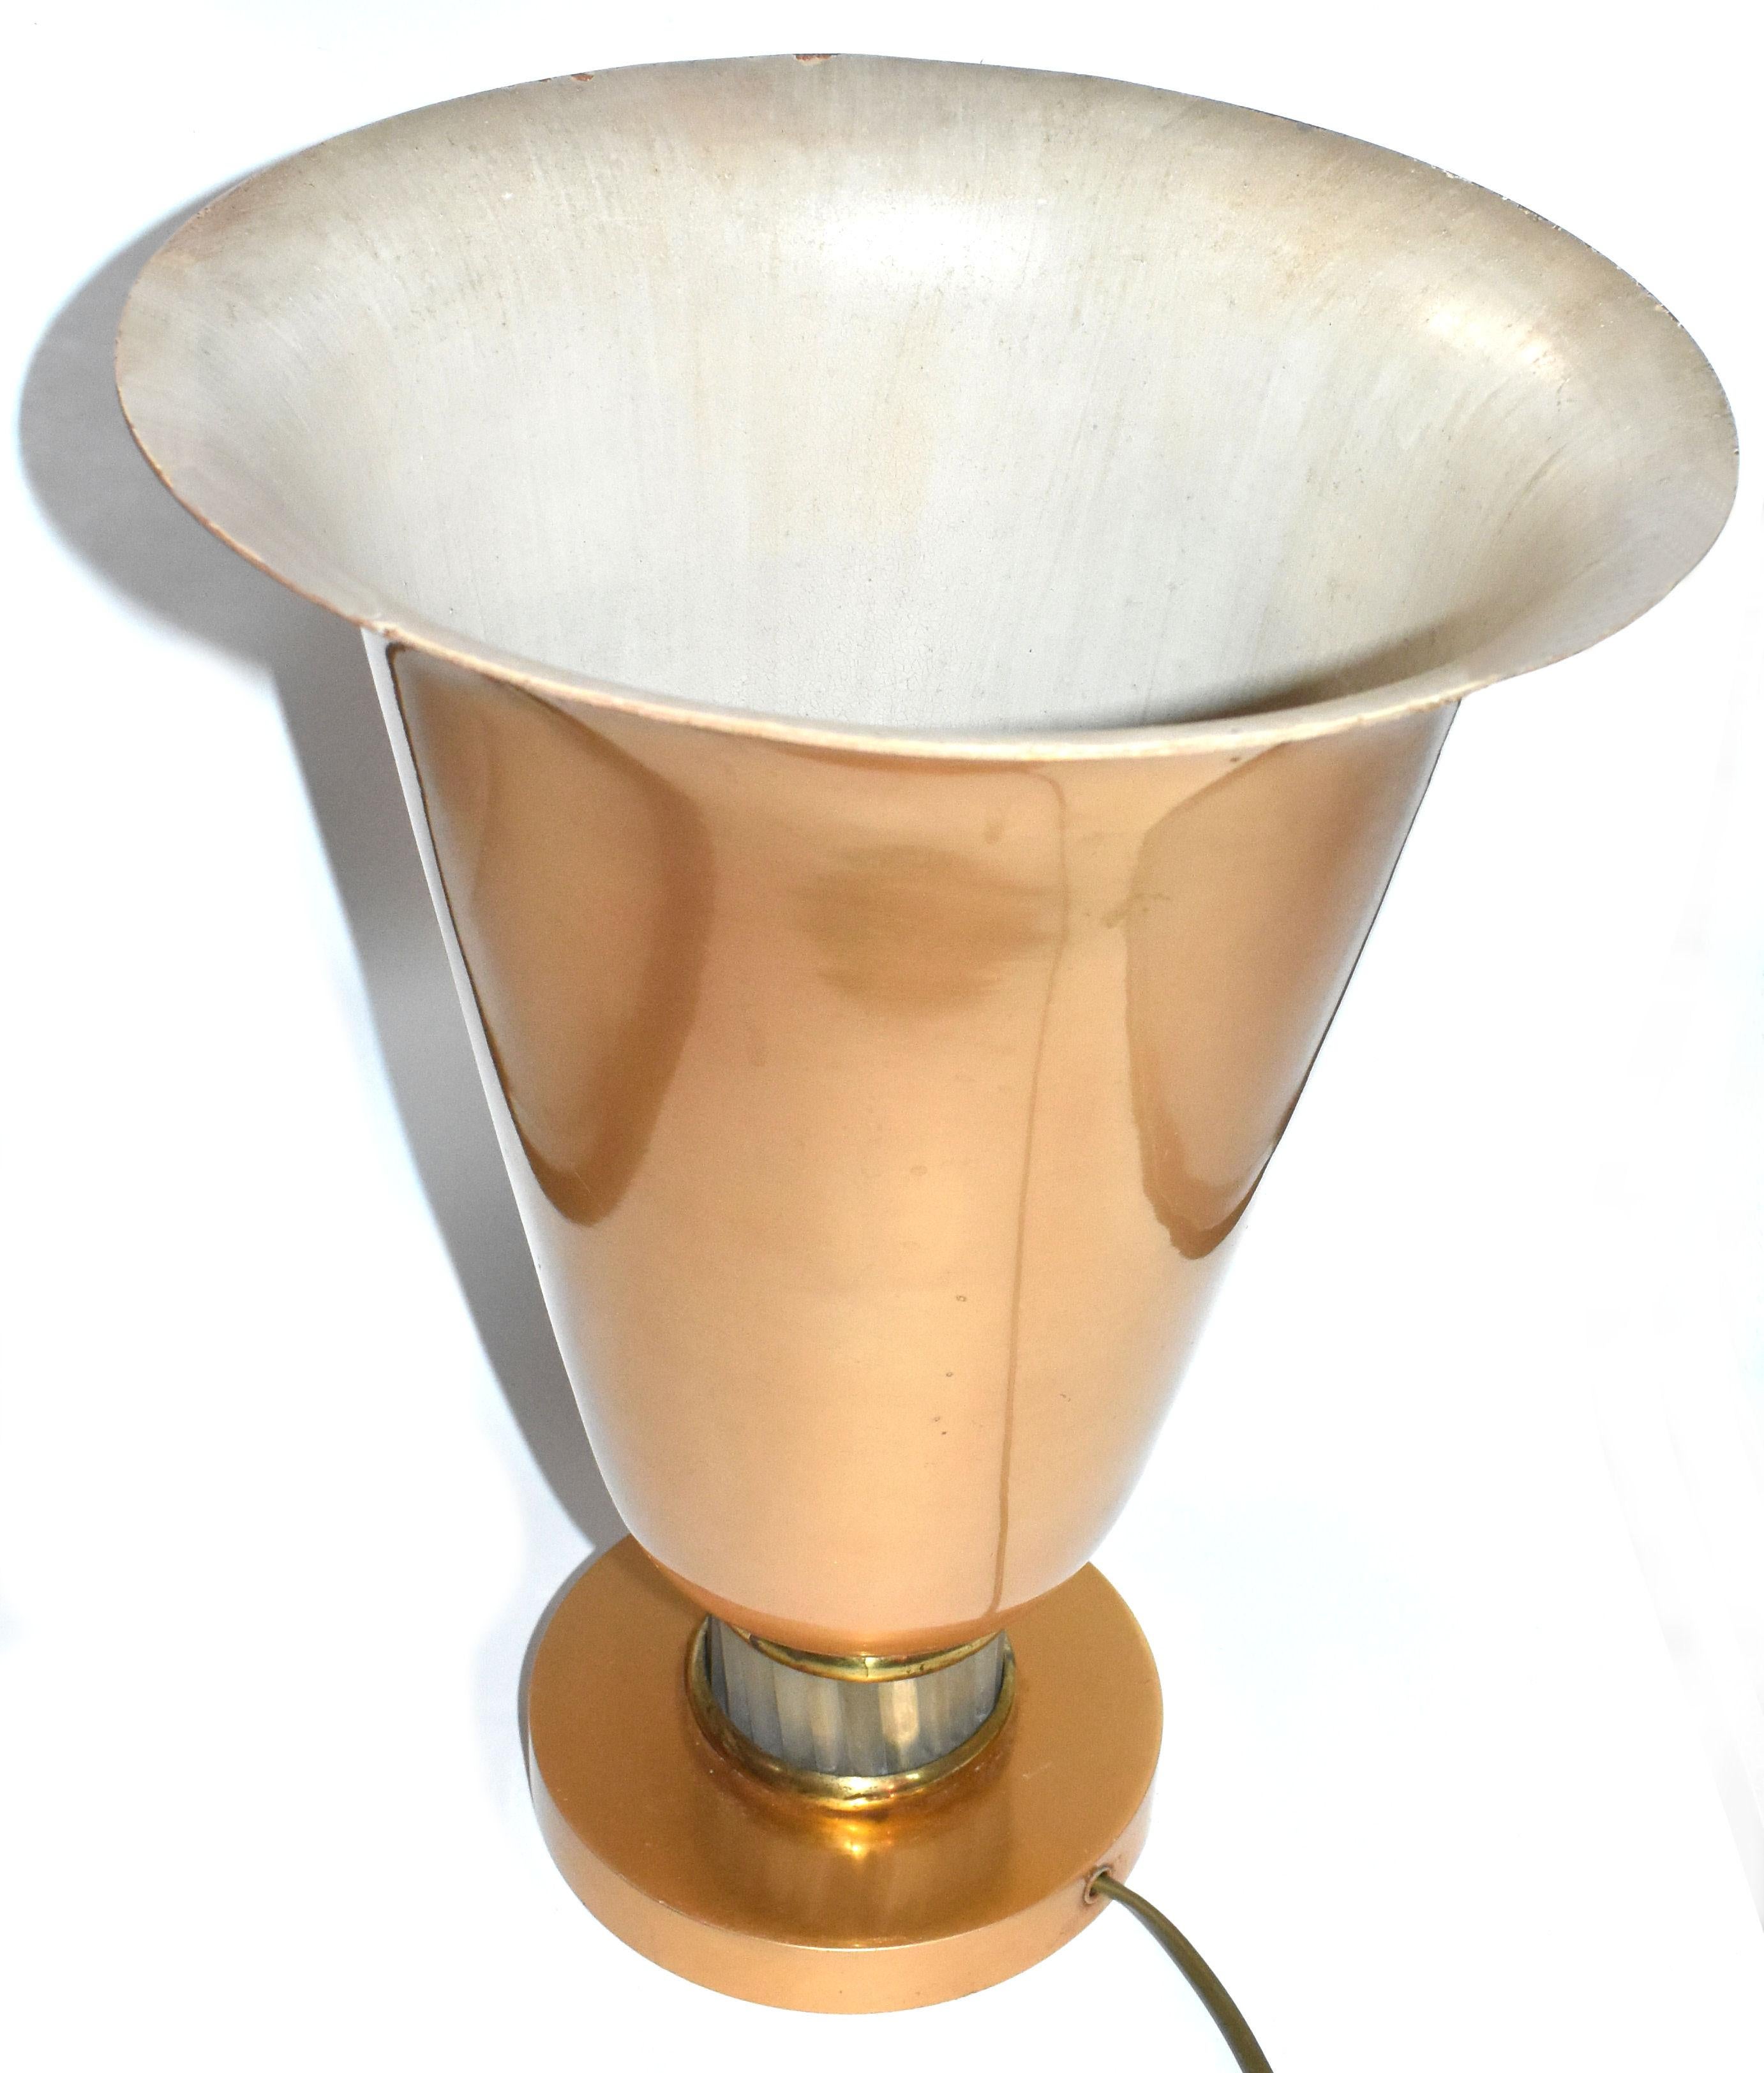 A lovely example of an Art Deco table uplighter that shows great style and imagination. It is made from a Spun aluminium and then decorated with a pale gold tone finish. It is cream on the inside and takes a normal bulb. There are sections of glass